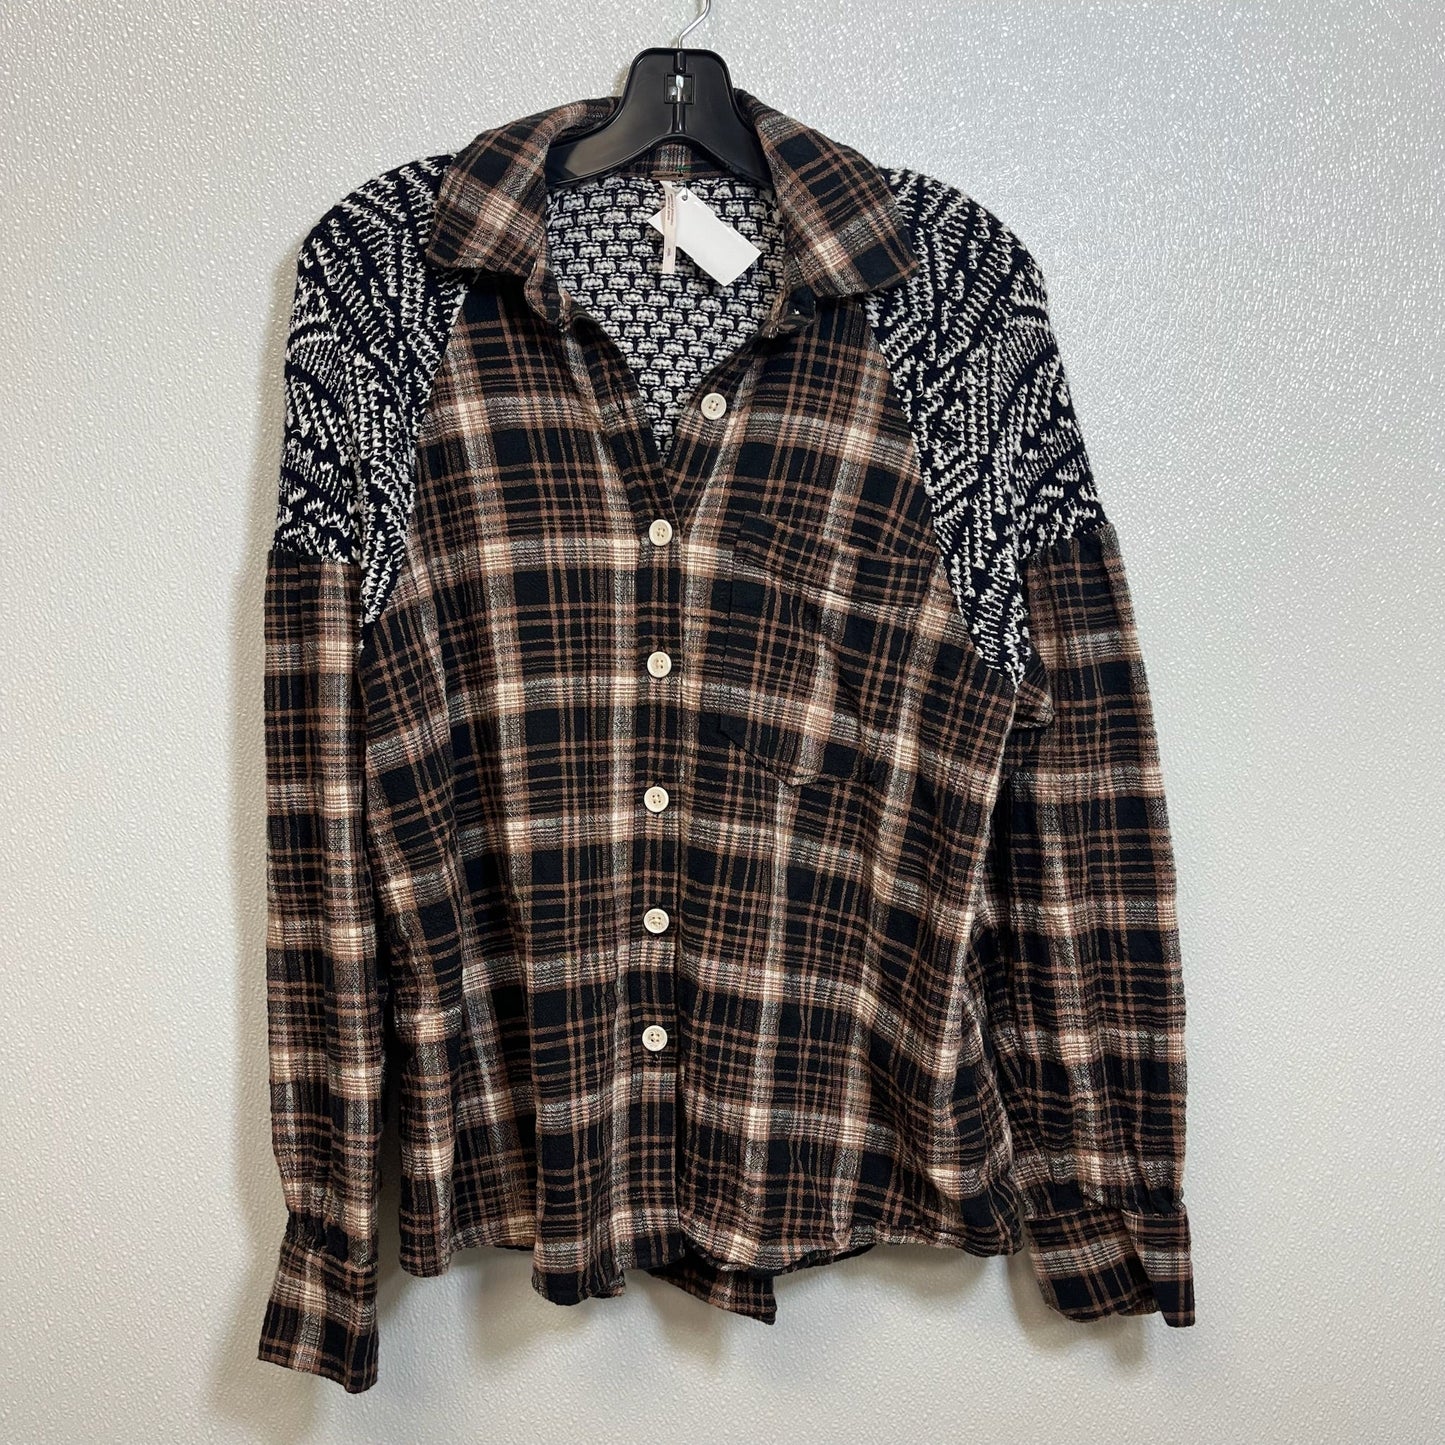 Plaid Top Long Sleeve Free People, Size S